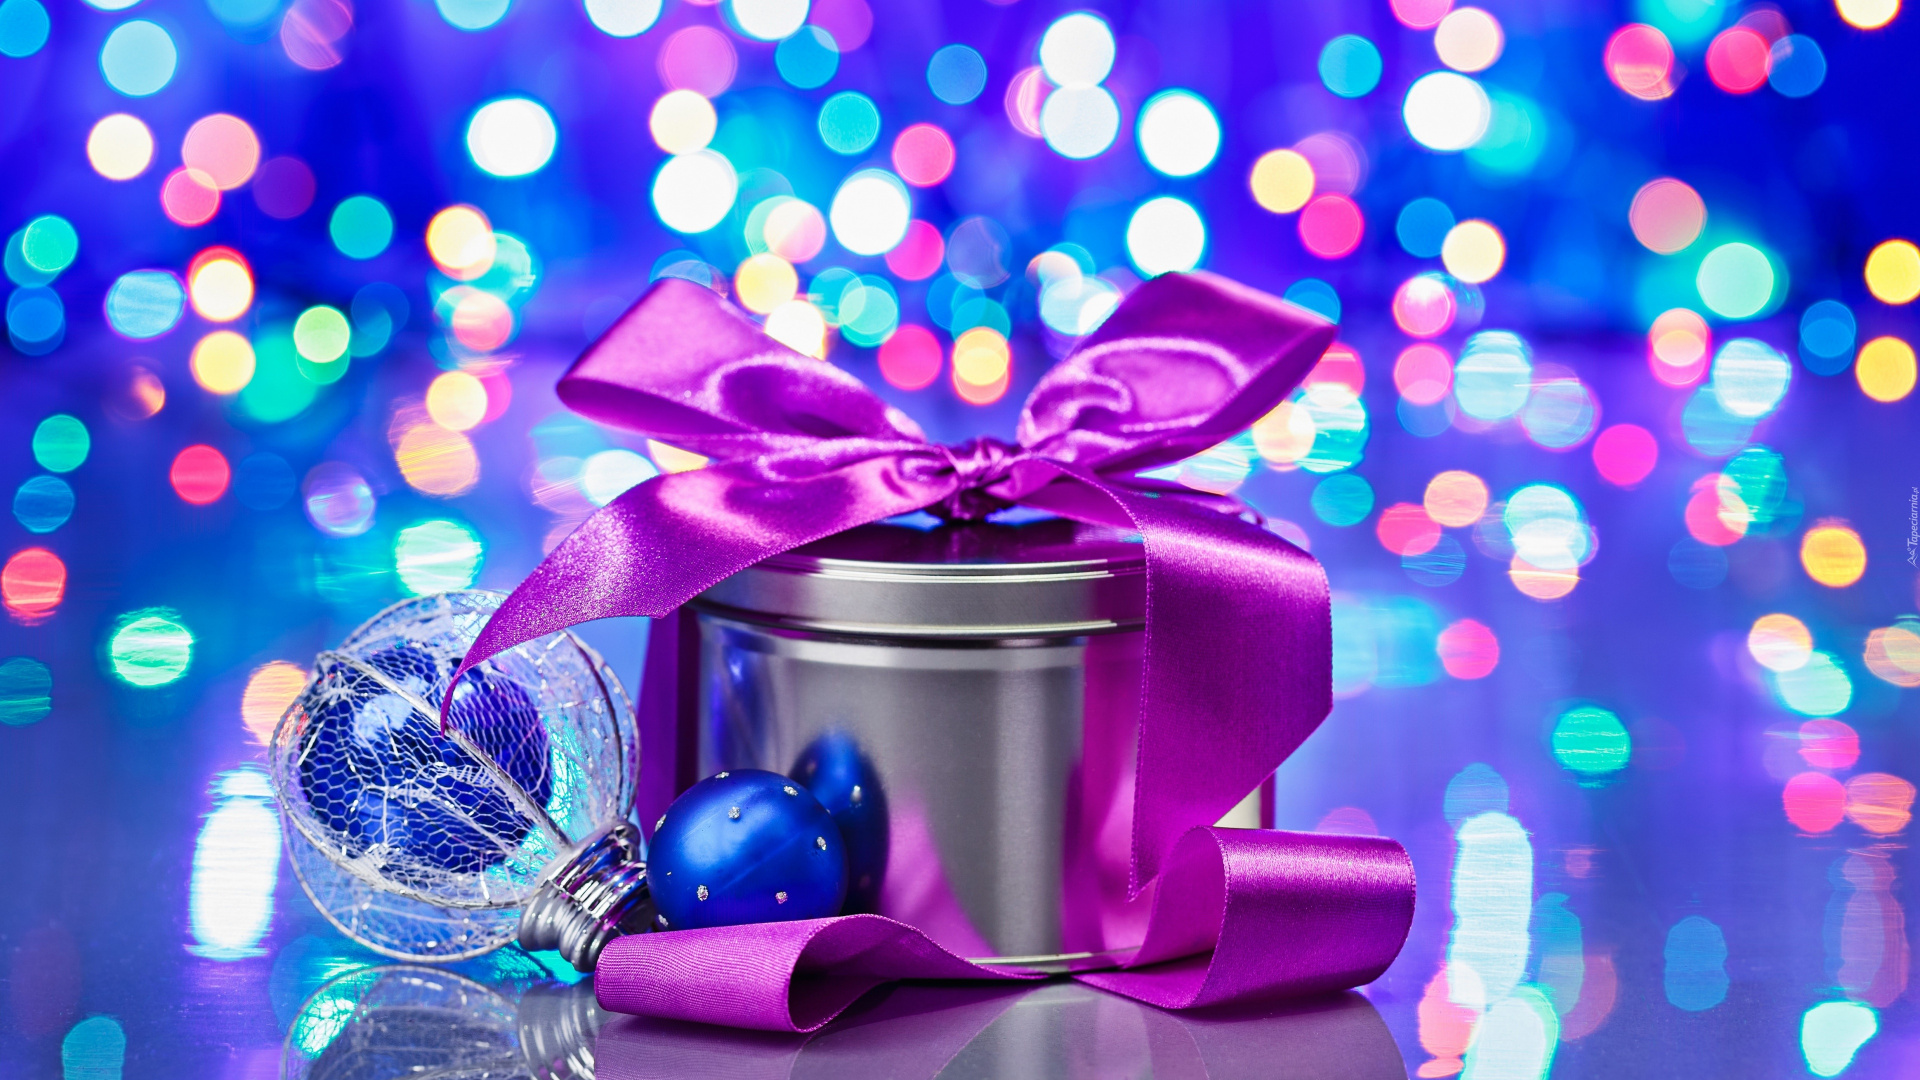 Christmas Day, New Year, Purple, Blue, Violet. Wallpaper in 1920x1080 Resolution